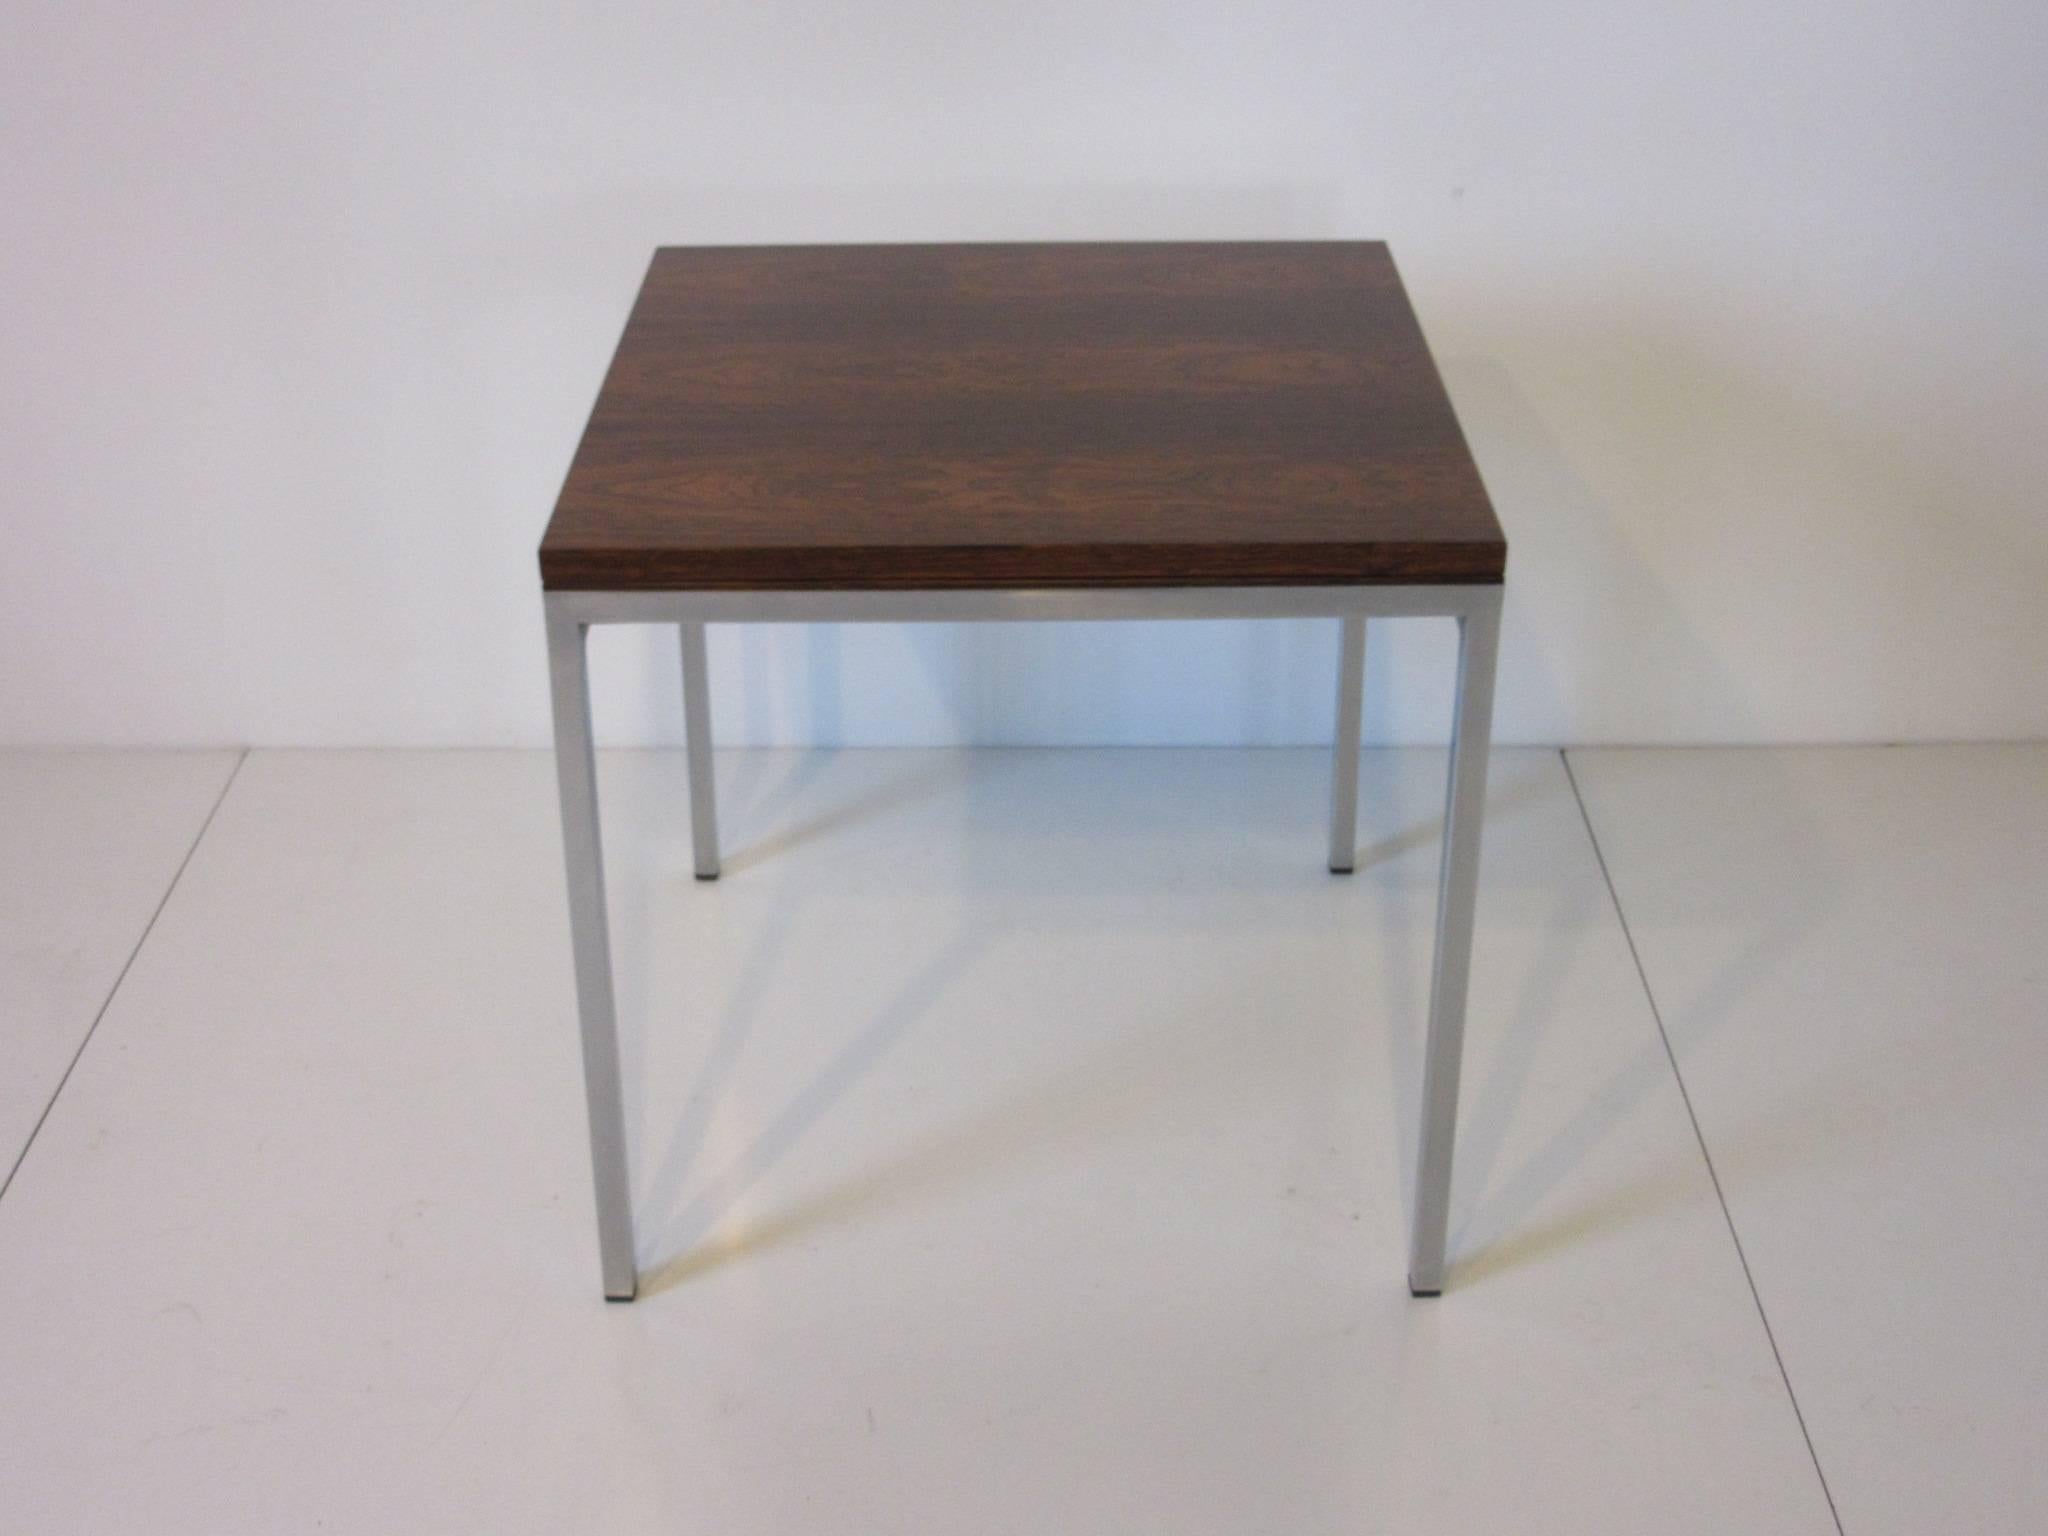 A dark and wonderfully grained Brazilian rosewood side table with satin chromed frame, when slid and flipped it turns into a coffee table. A great piece for that special place, retains the manufactures tag to the bottom WR. When closed it measures